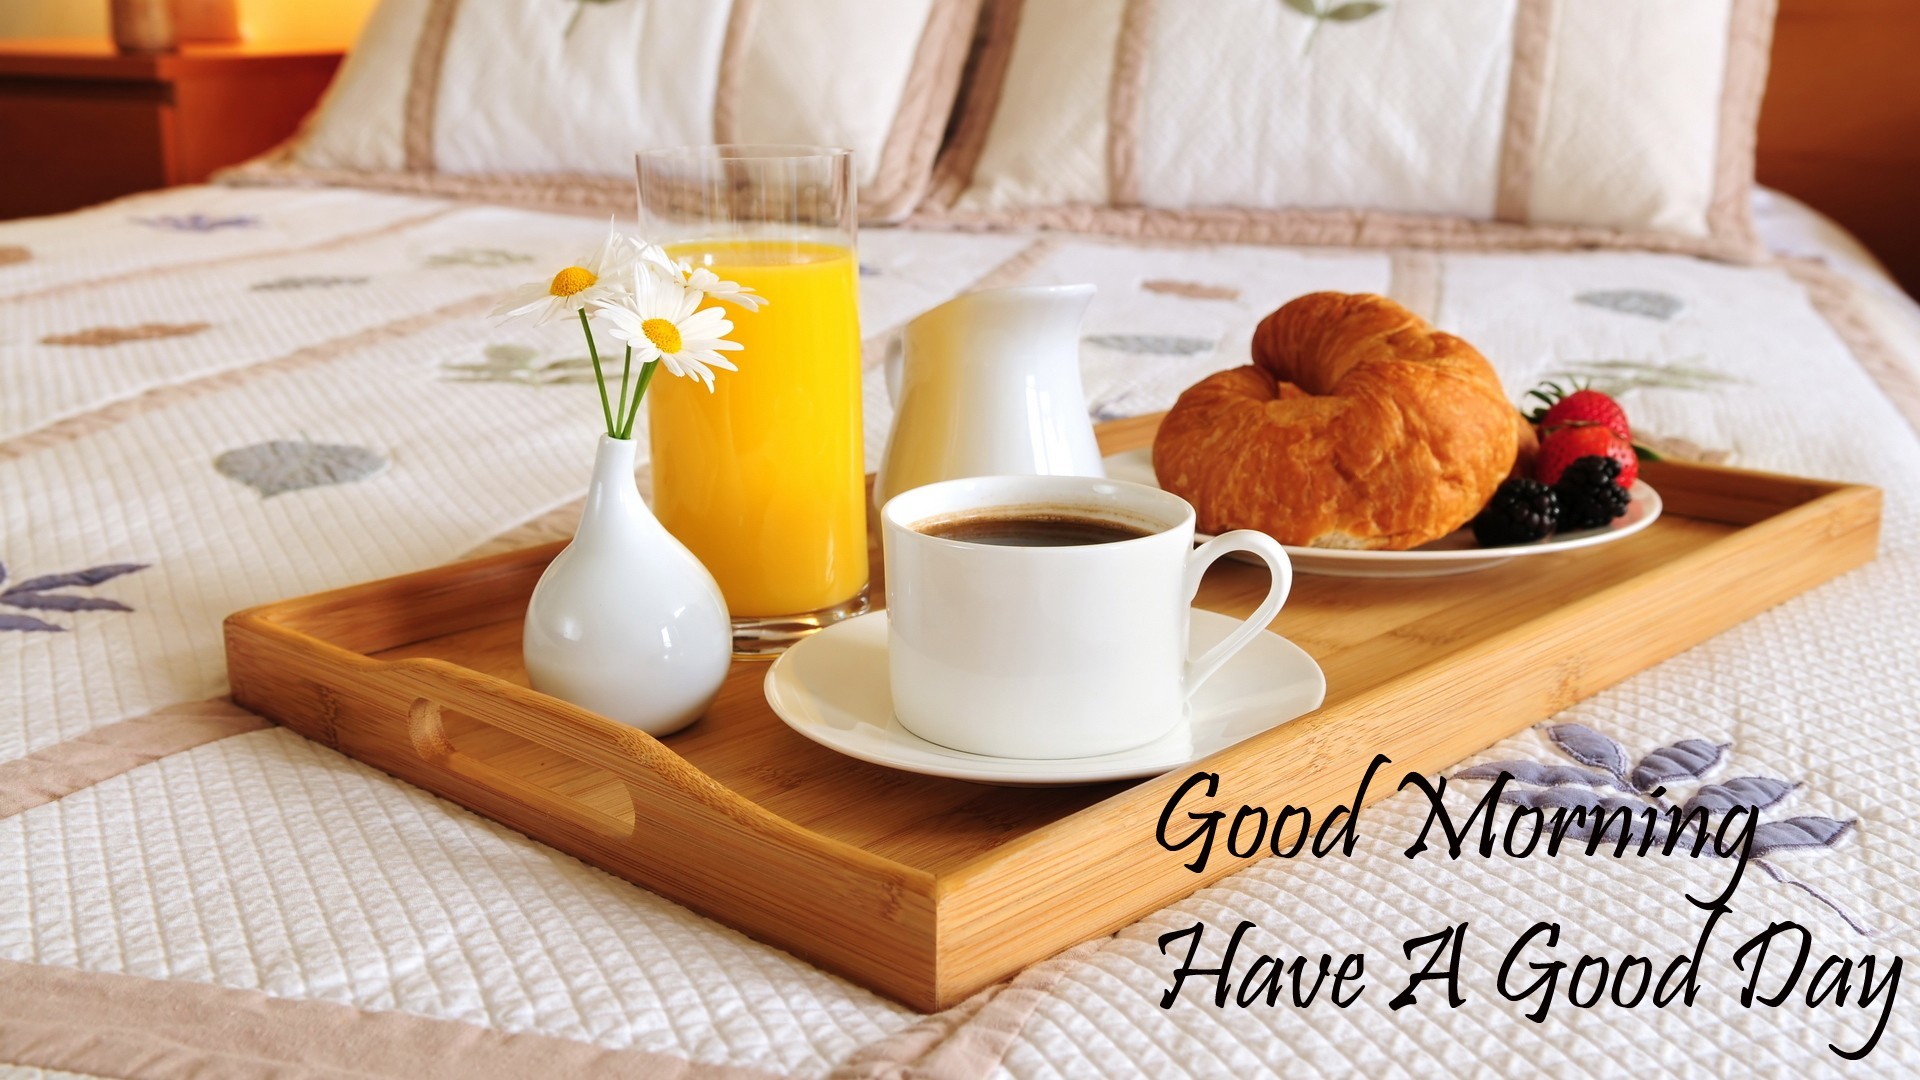 Good Morning HD Backgrounds 